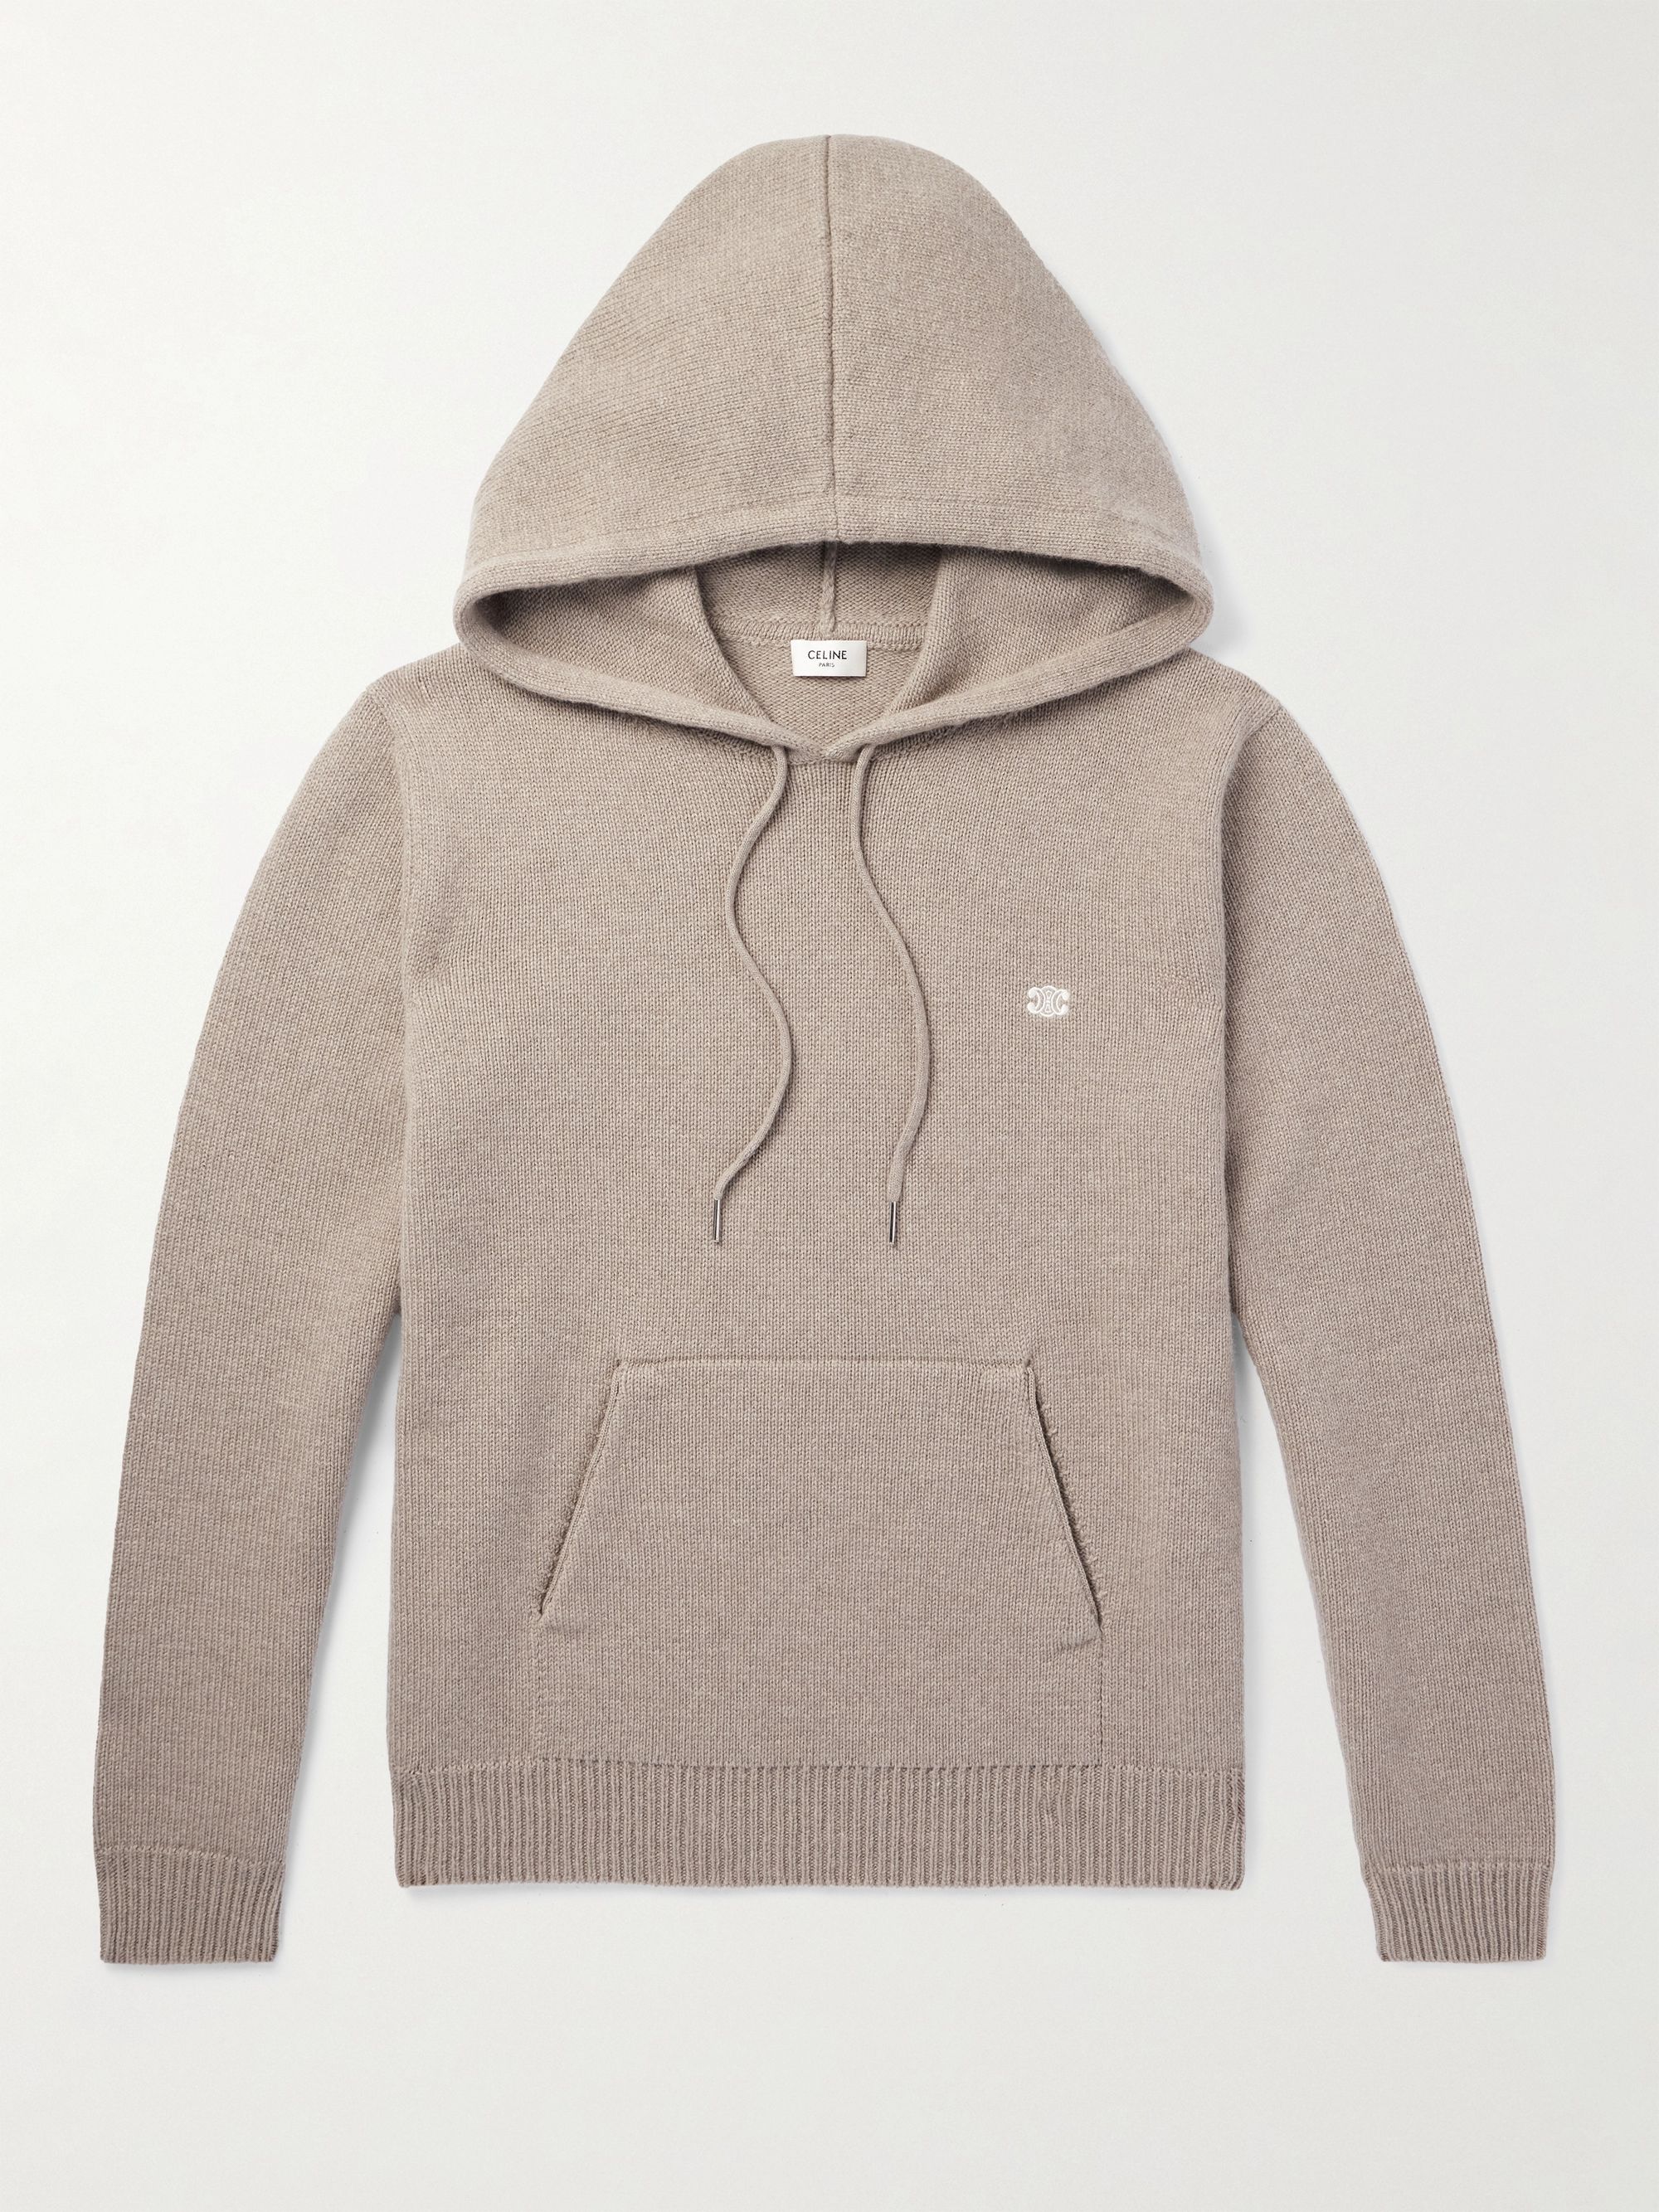 CELINE HOMME Logo-Embroidered Wool and Cashmere-Blend Hoodie